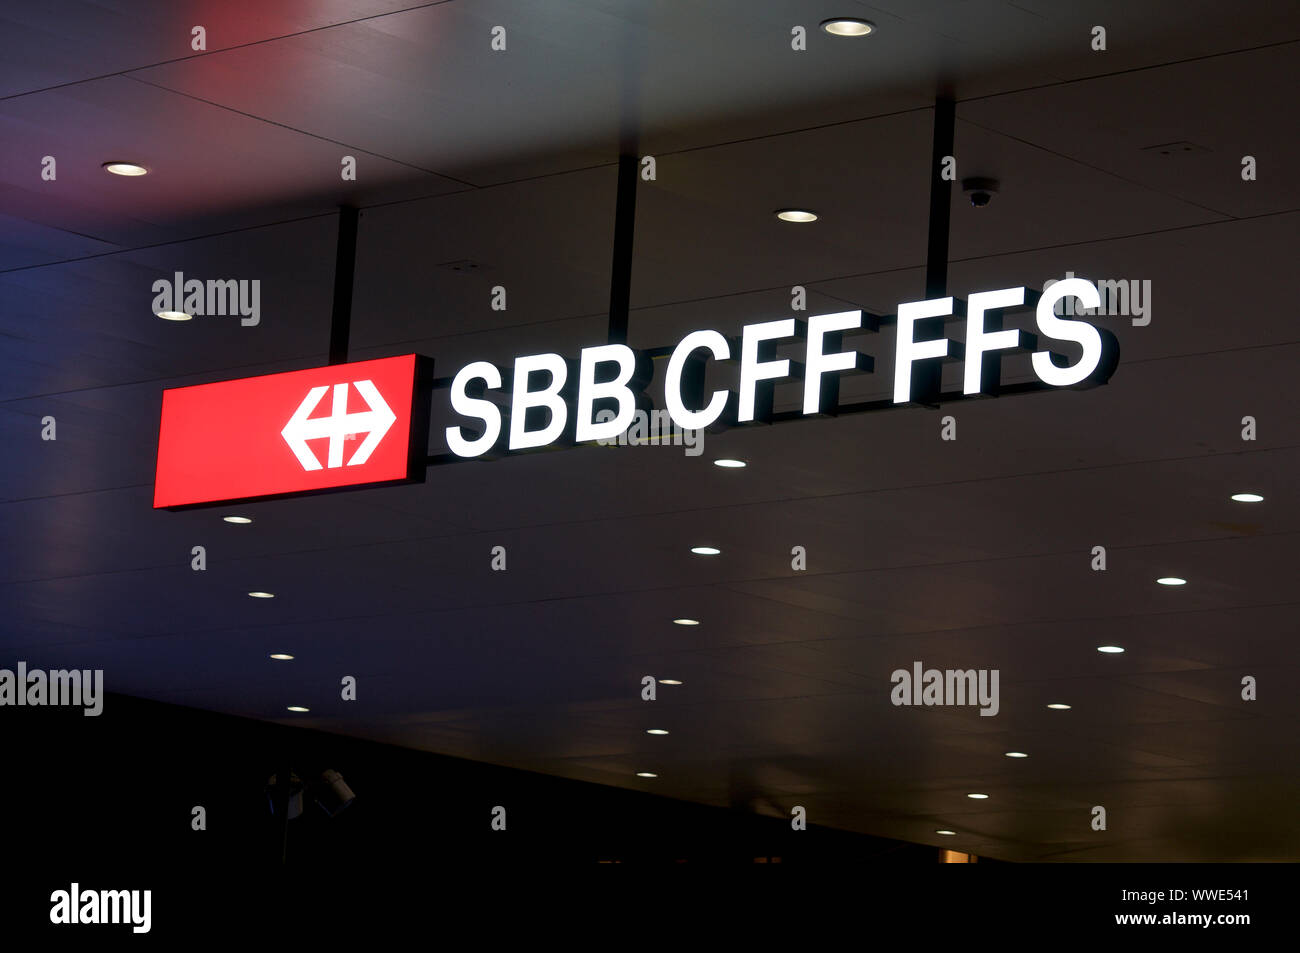 Lugano, Ticino, Switzerland - 17th August 2019 : View on the SBB / CFF / FFS (Swiss Federal Railways company) signage hanging from the ceiling of the Stock Photo